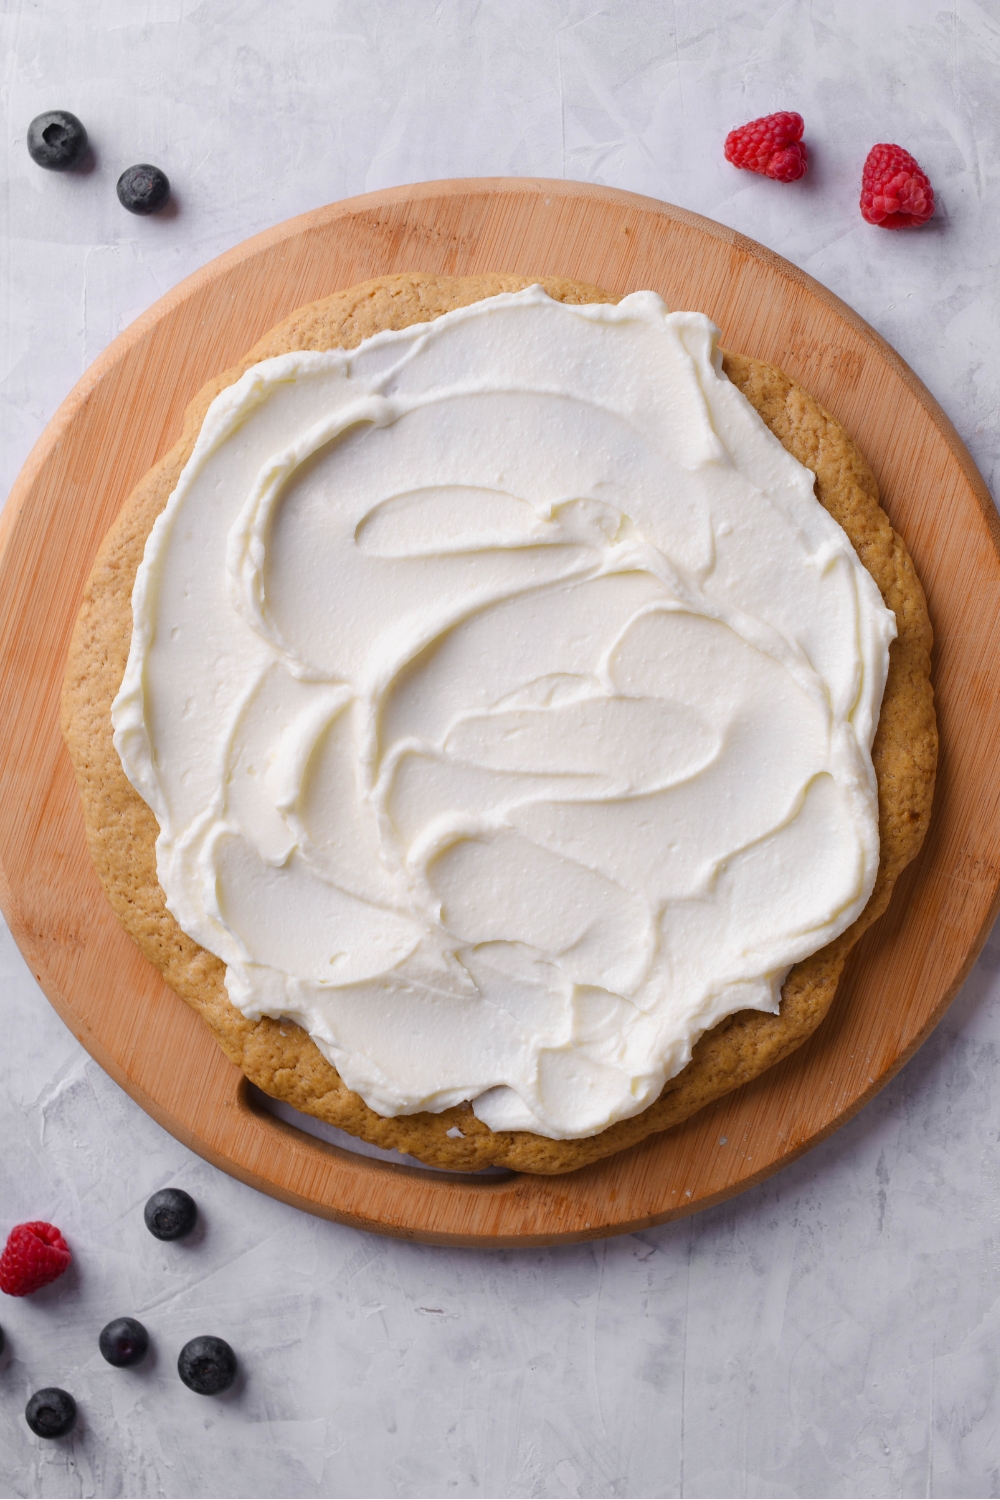 The sugar cookie crust with cream cheese frosting.